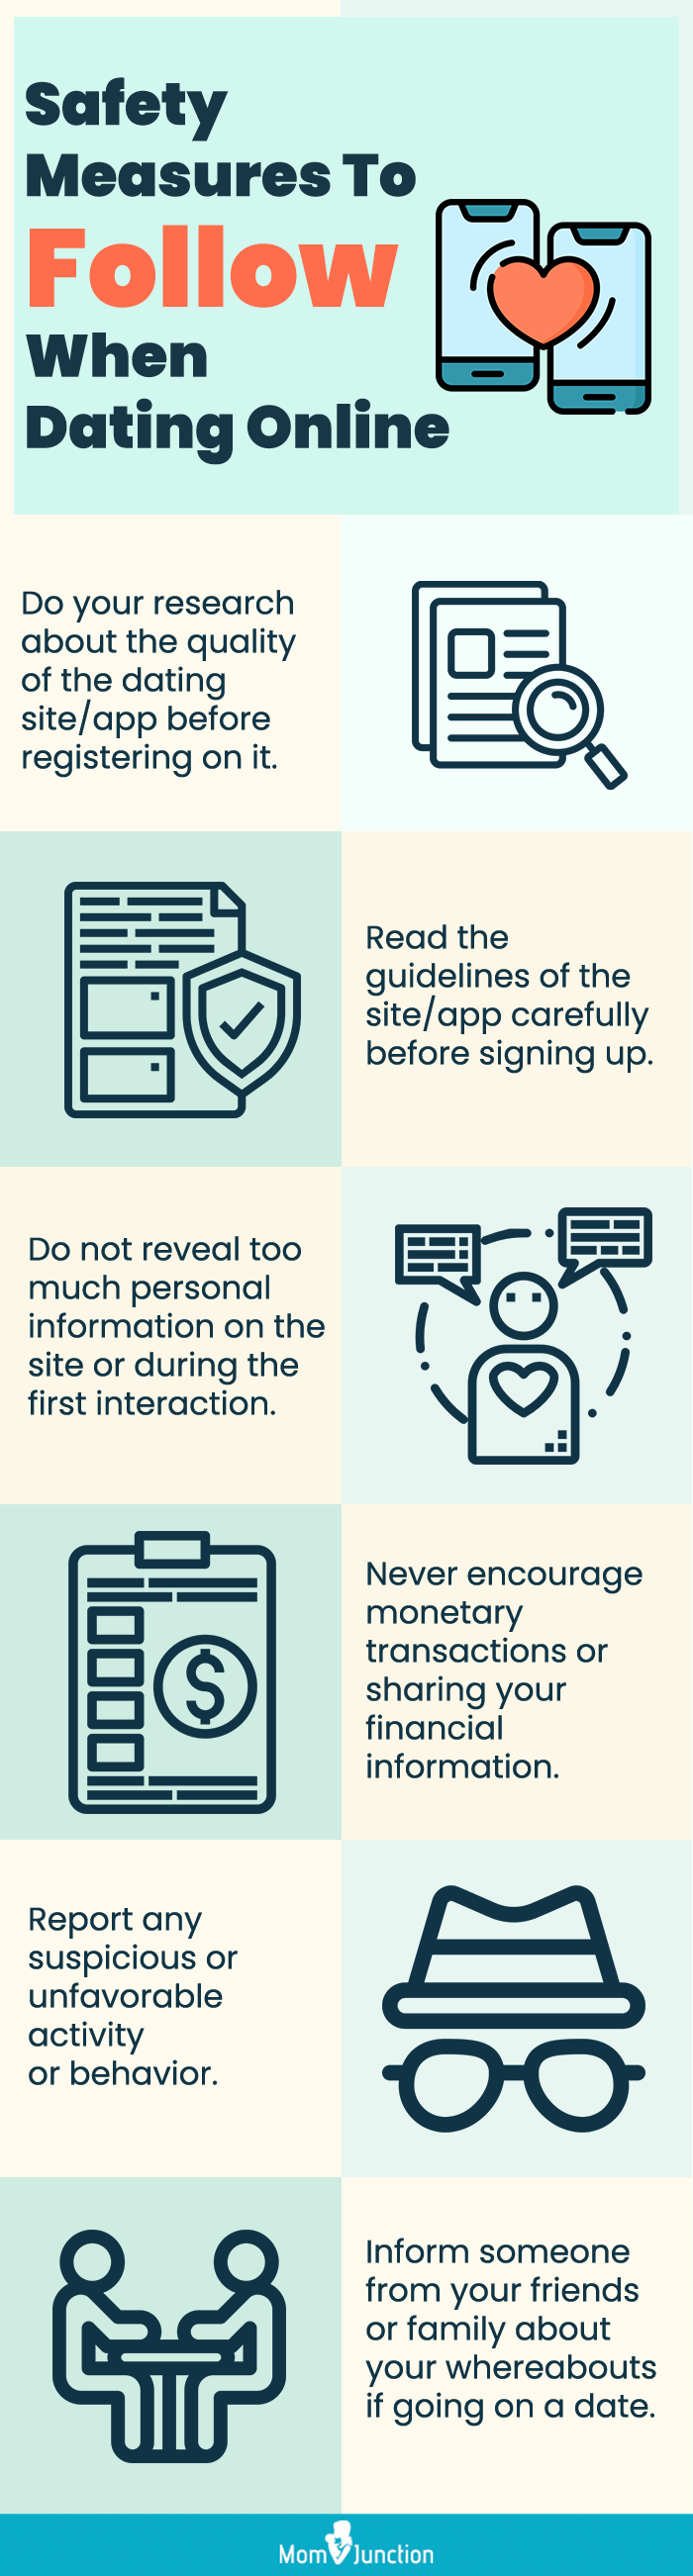 safety measures to follow when dating [infographic]